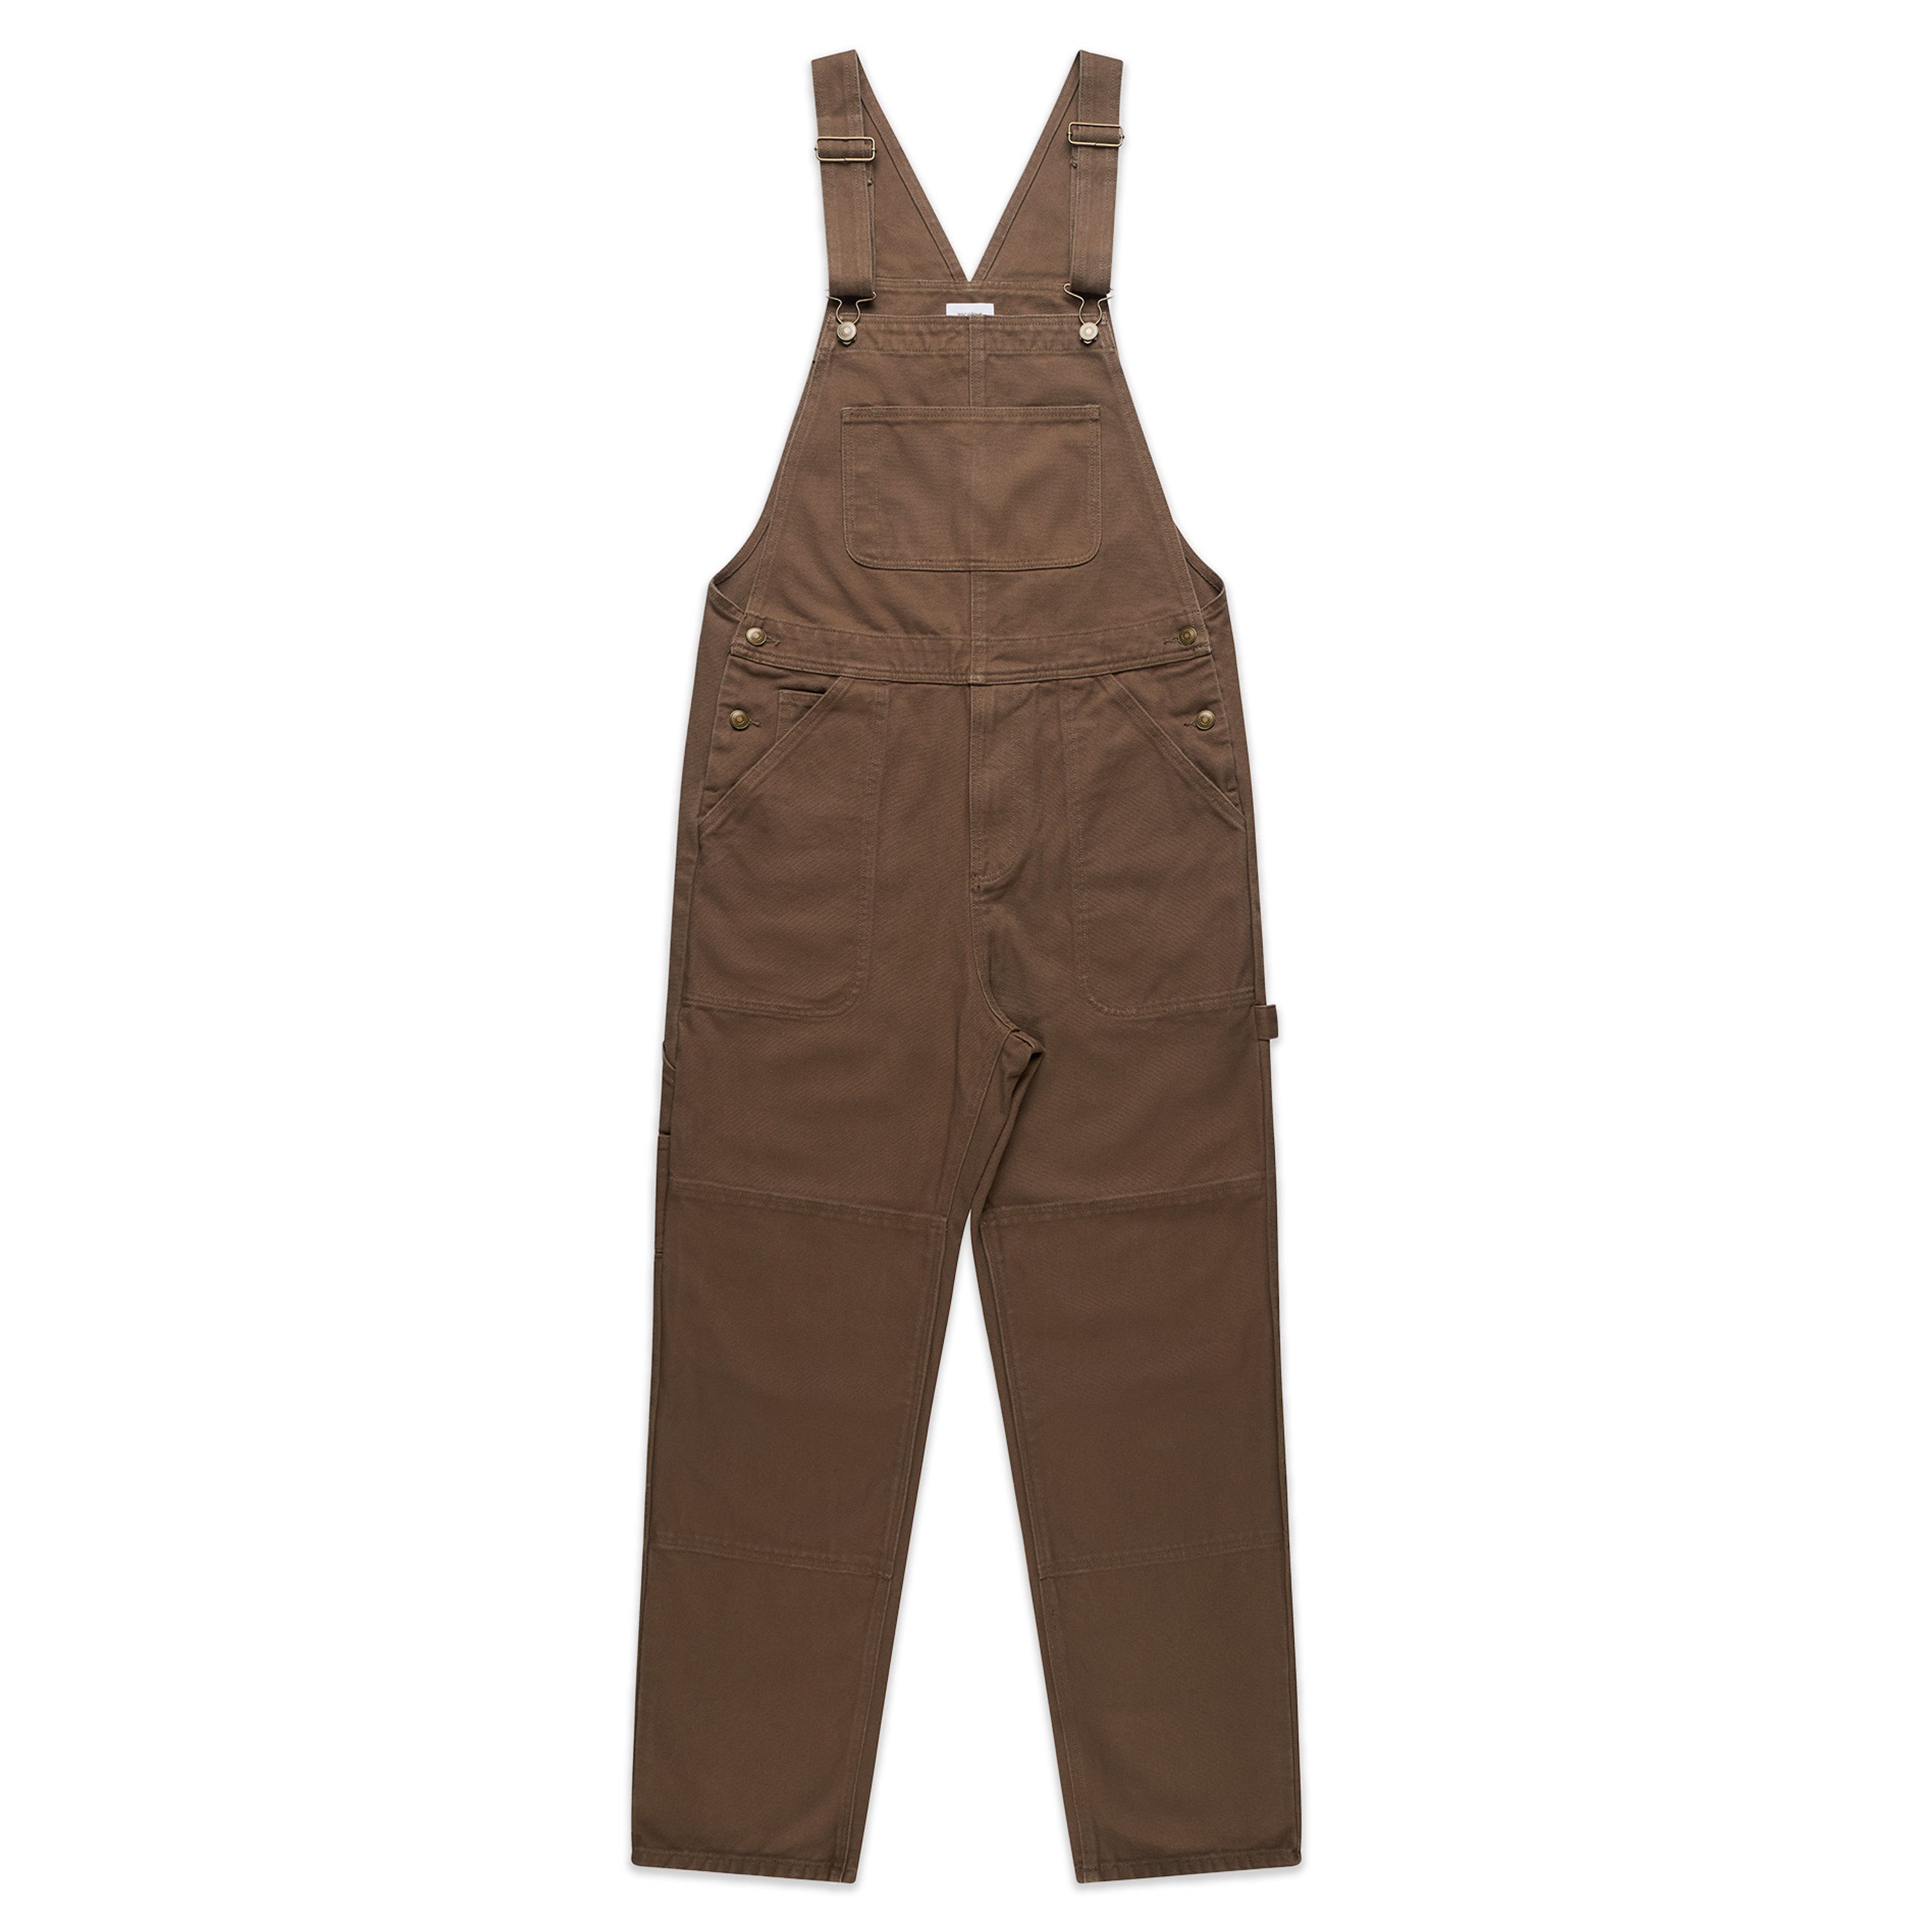 Mens Canvas Overalls - 5980 - AS Colour US